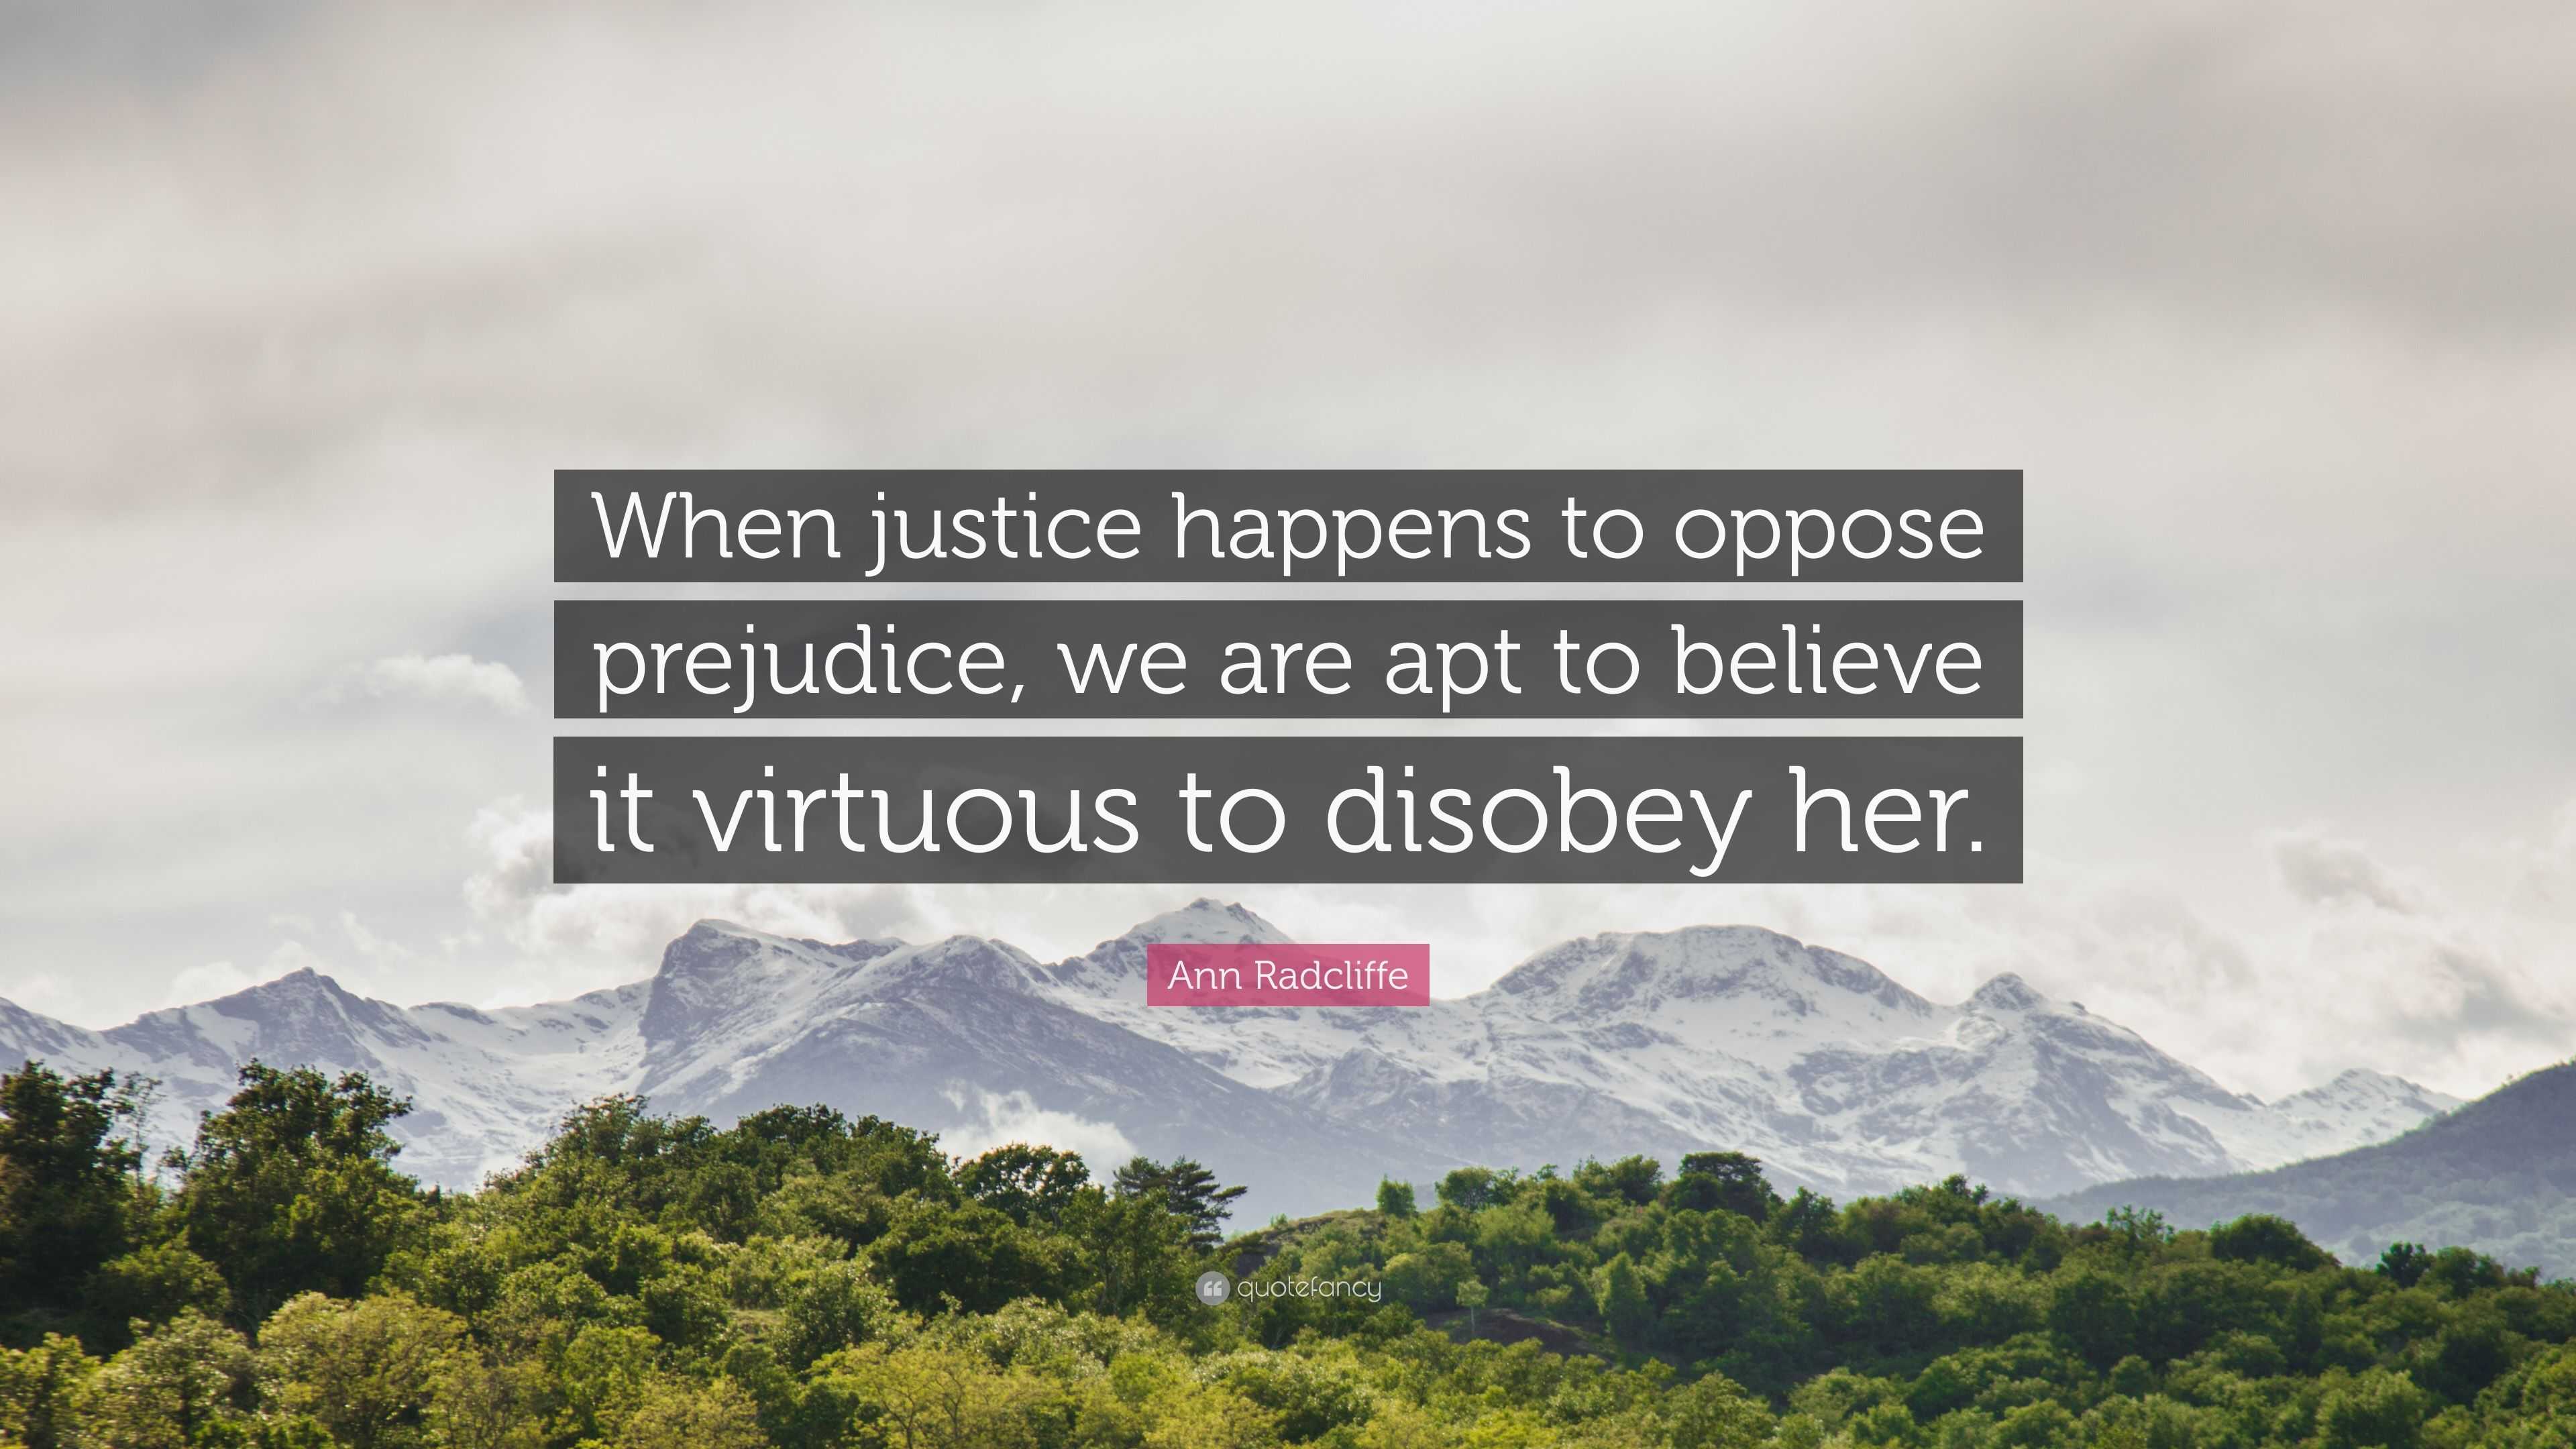 Ann Radcliffe Quote: “When justice happens to oppose prejudice, we are ...